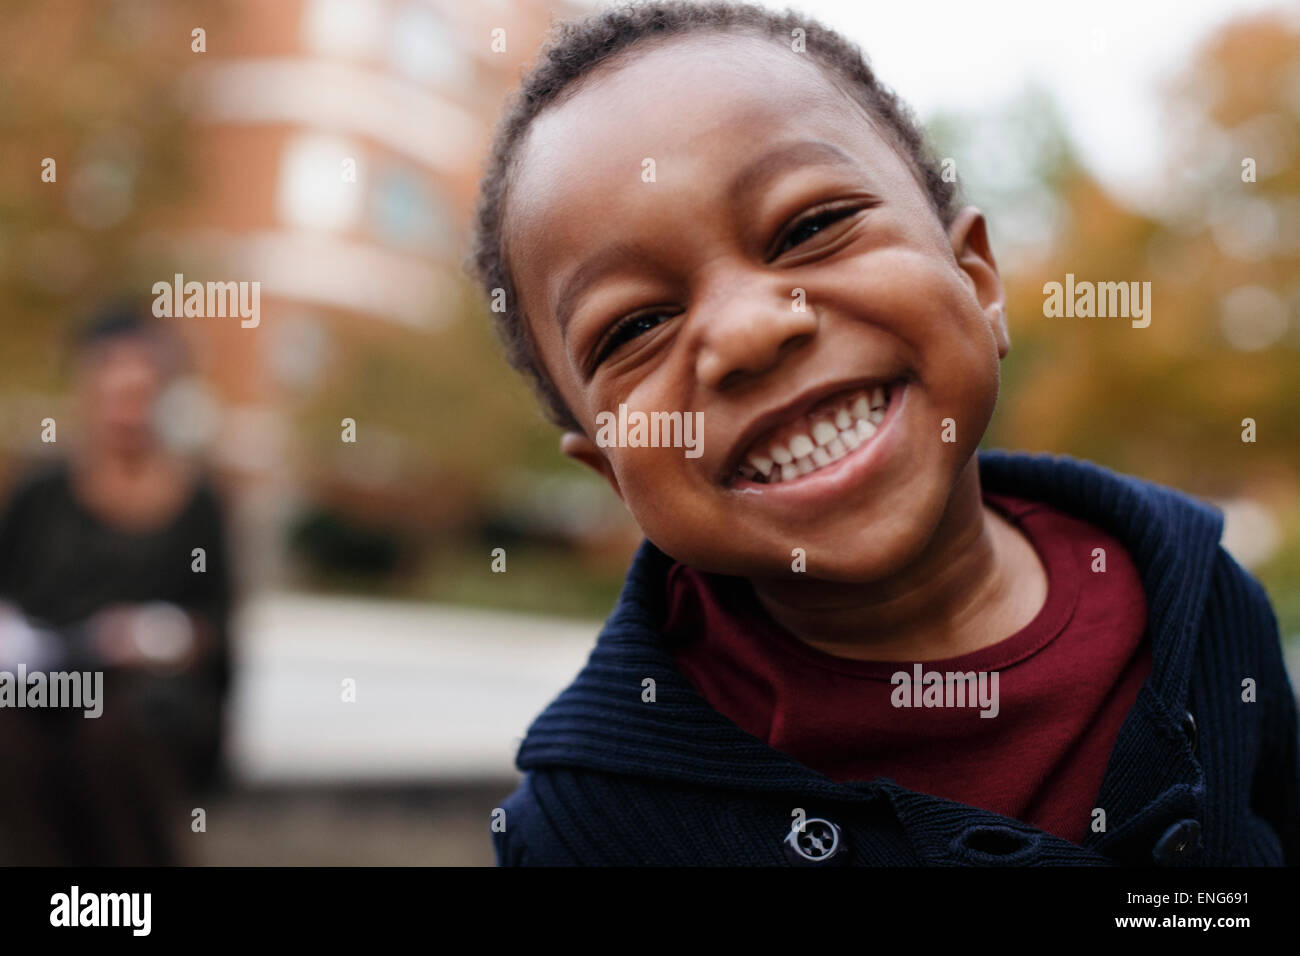 Close up of smiling face of African American boy Banque D'Images